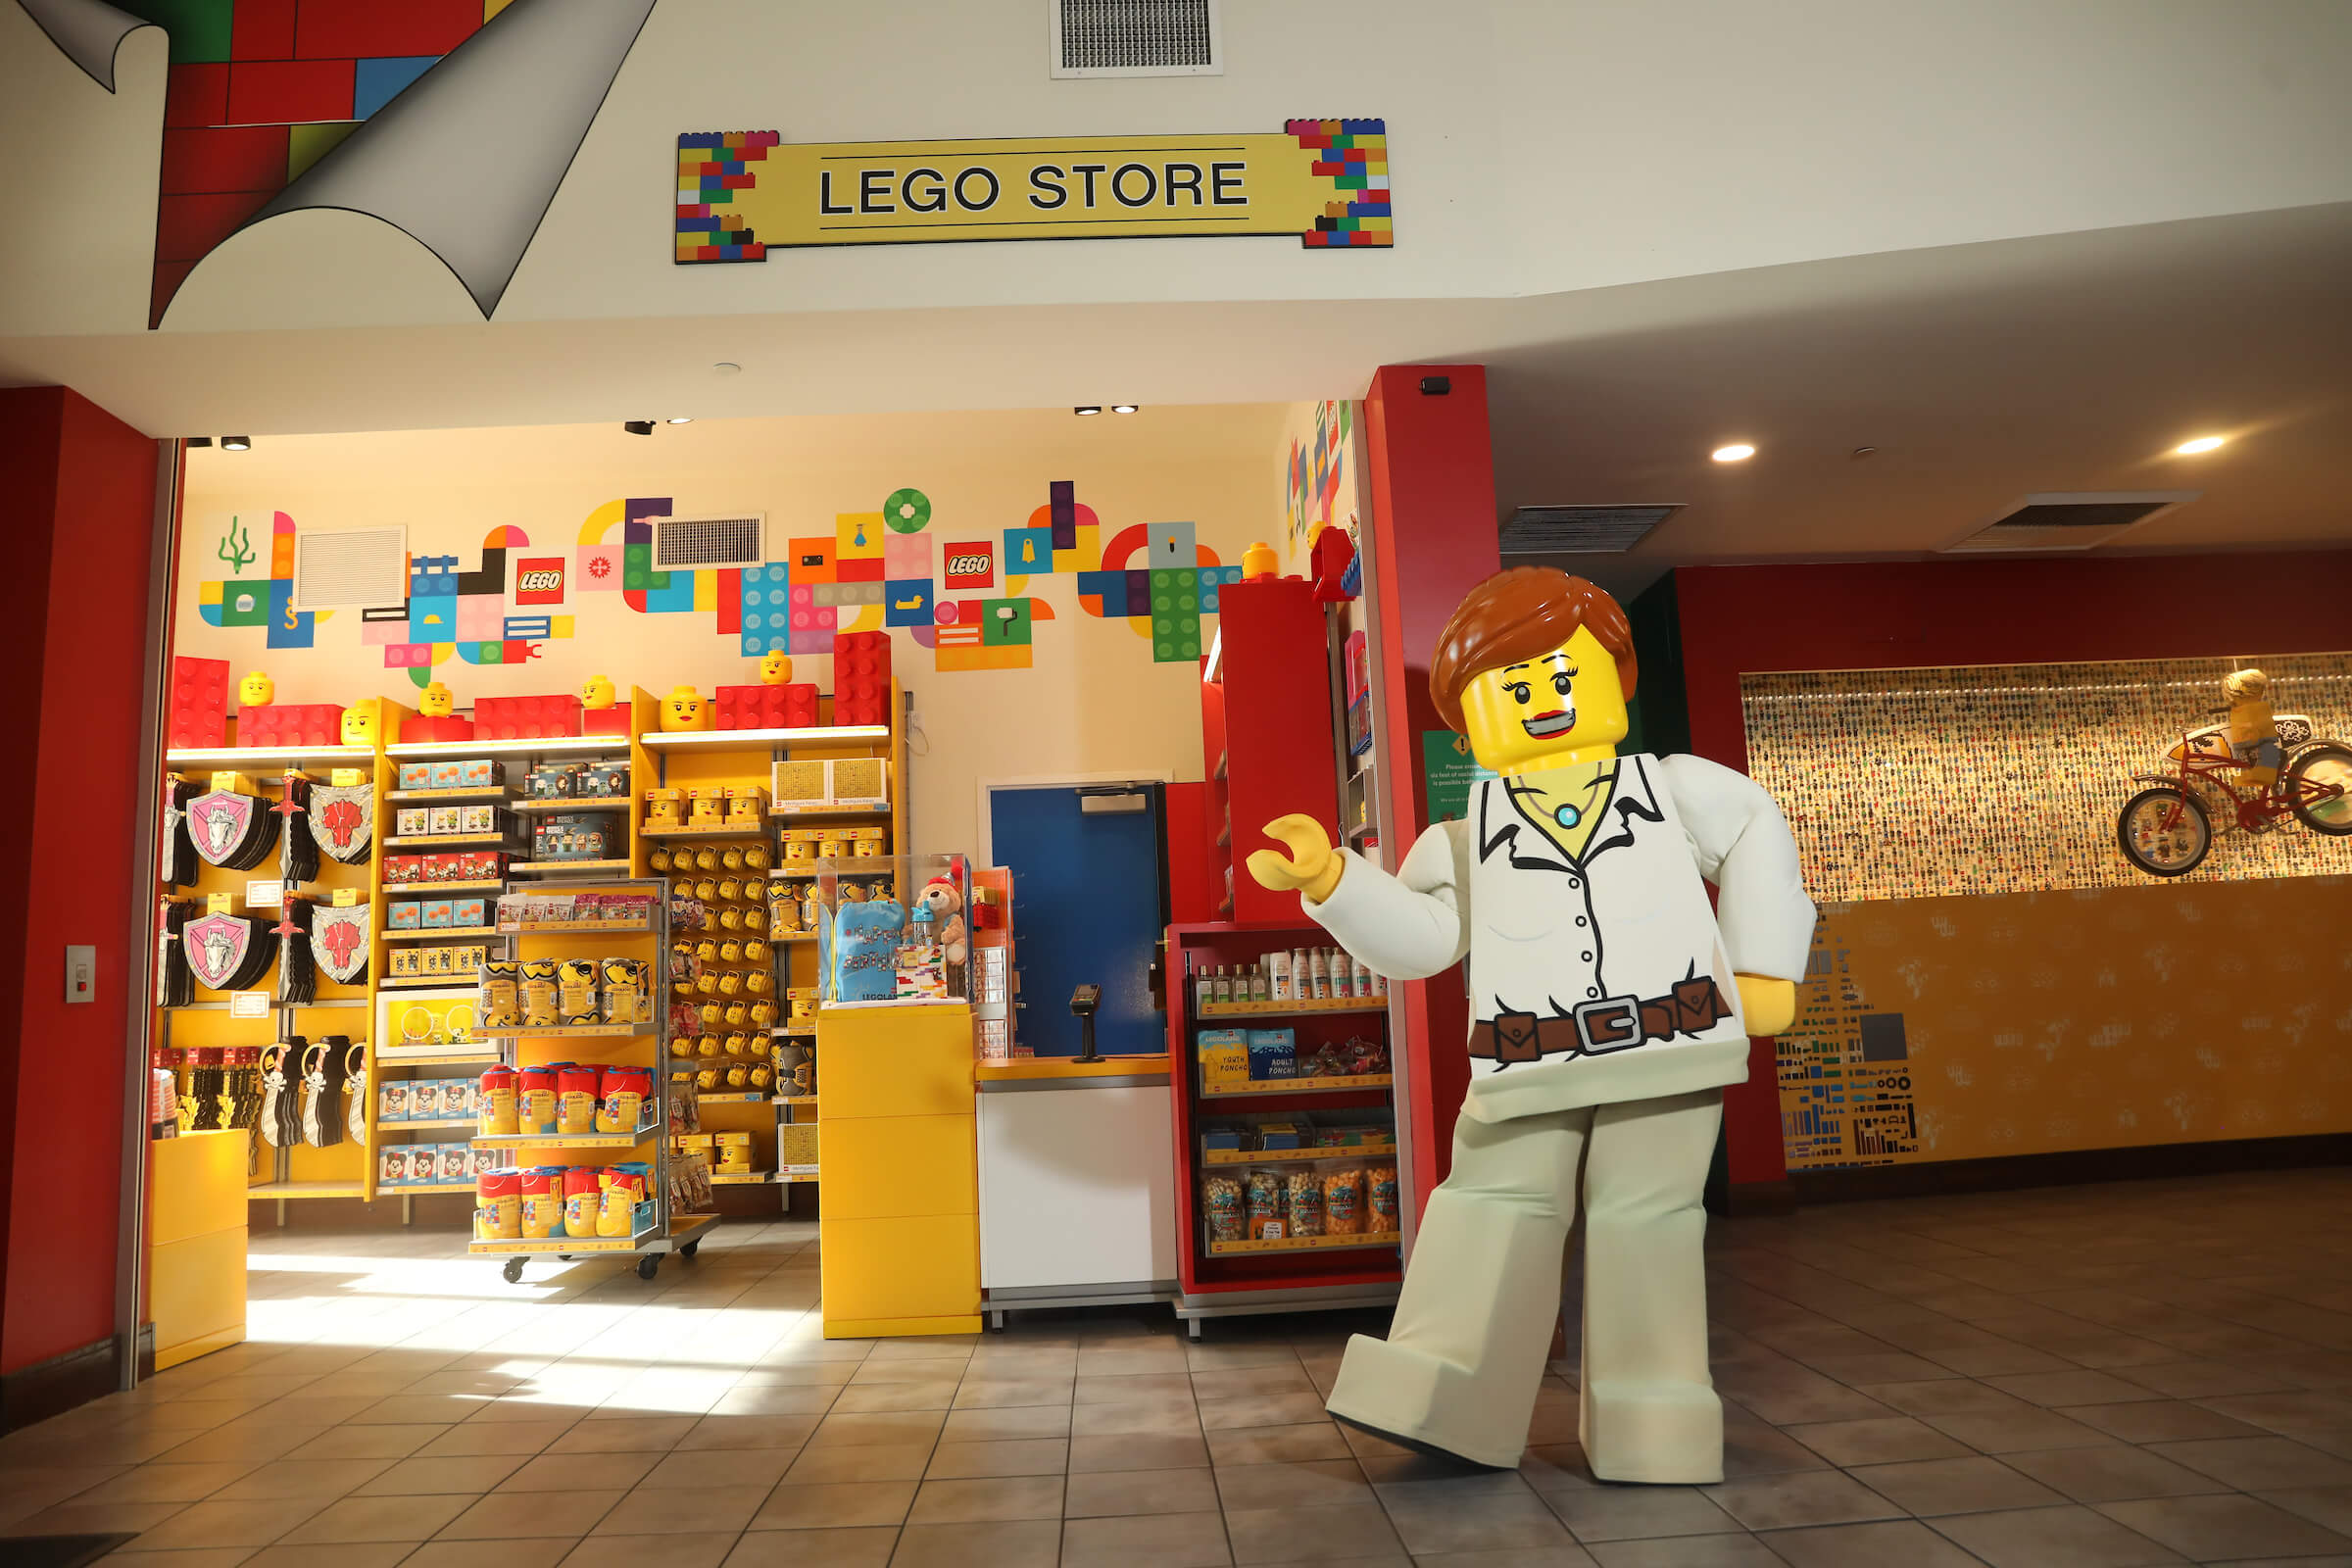 LEGOLAND Hotel Gift Shop with Adventure Girl Character